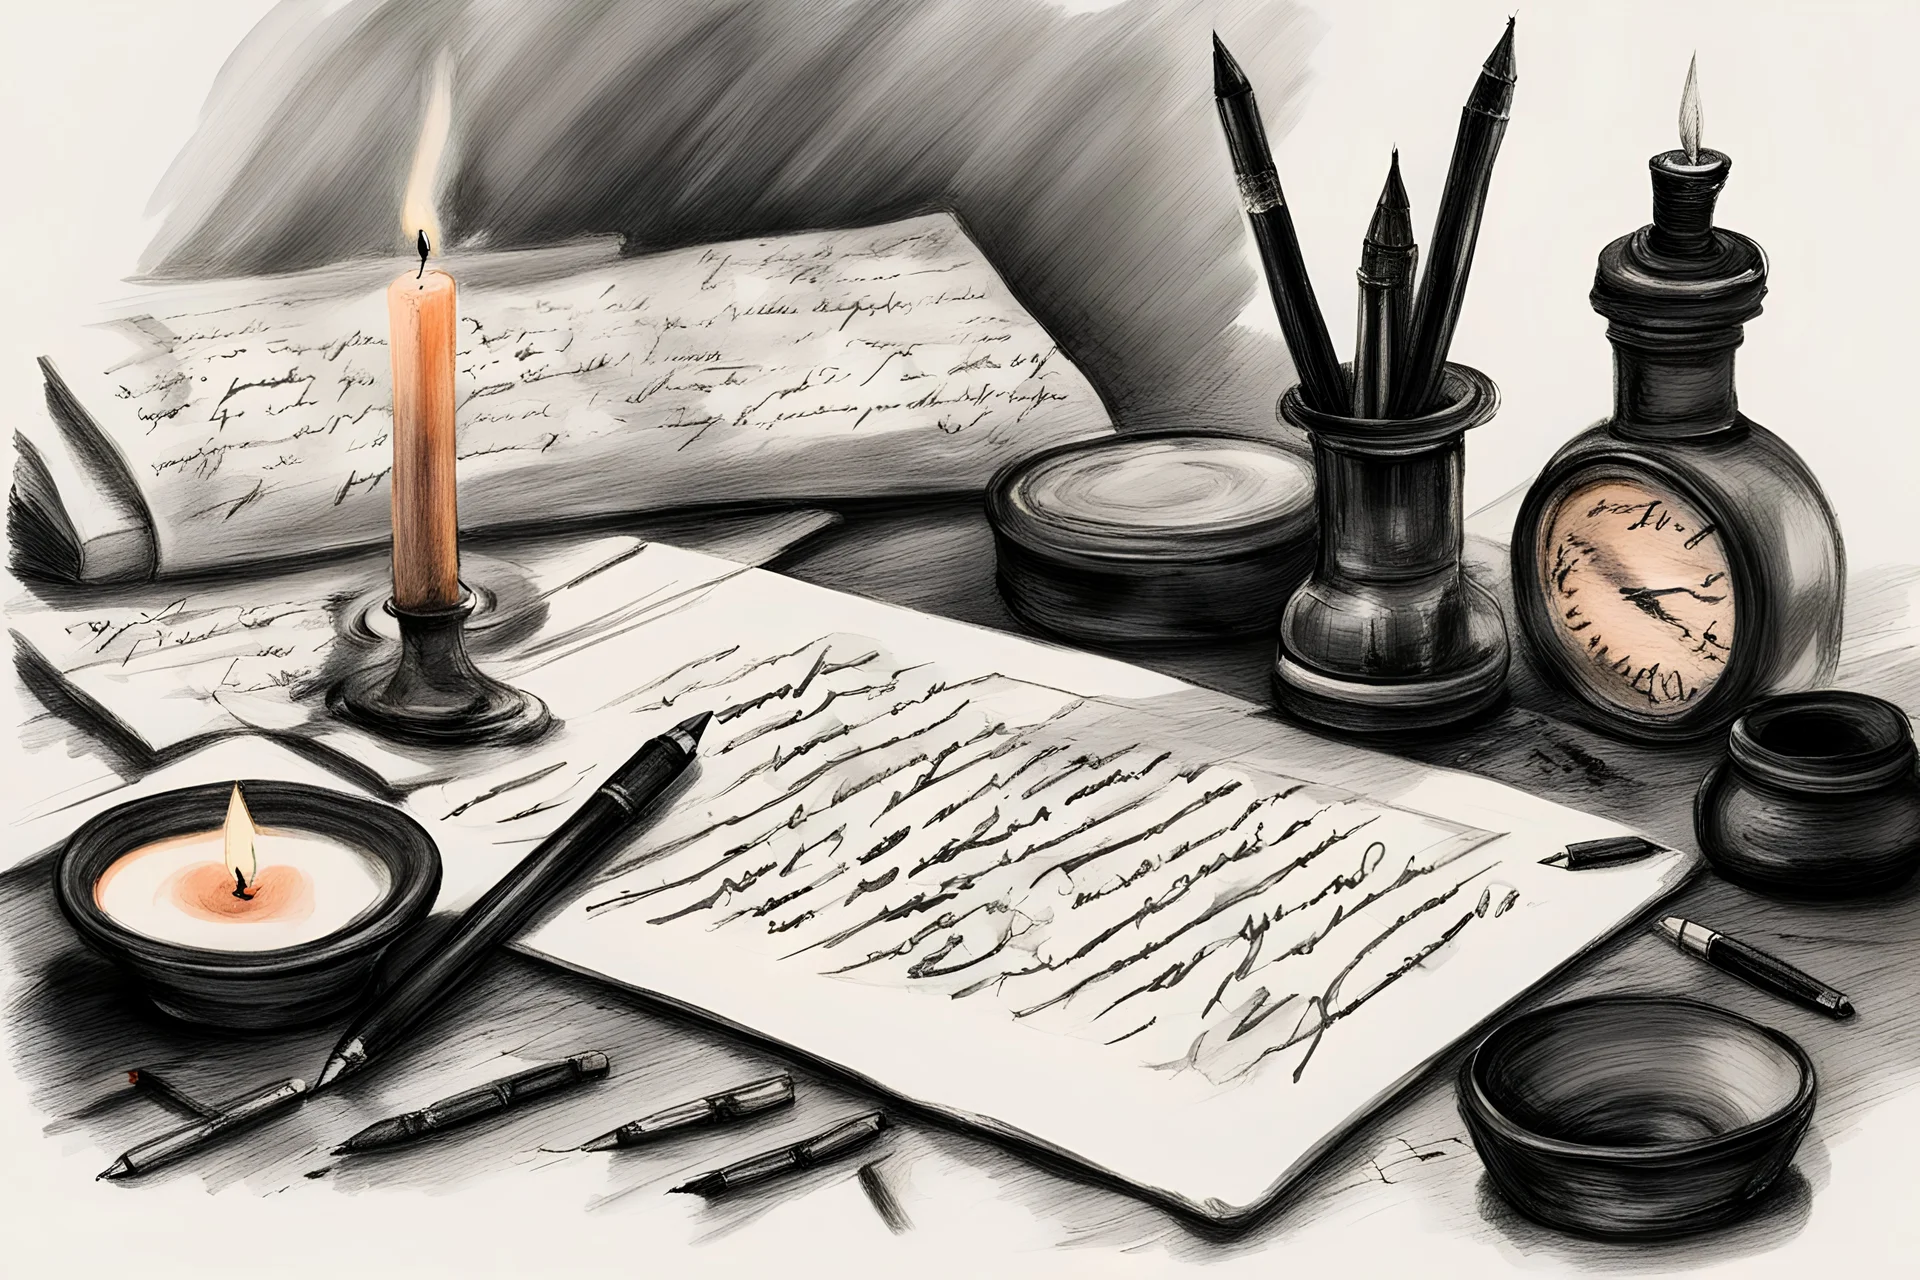 A hand writing a nostalgic letter, pens, an inkwell and a candle, a picture in shades of black, painted with crayon, high quality details